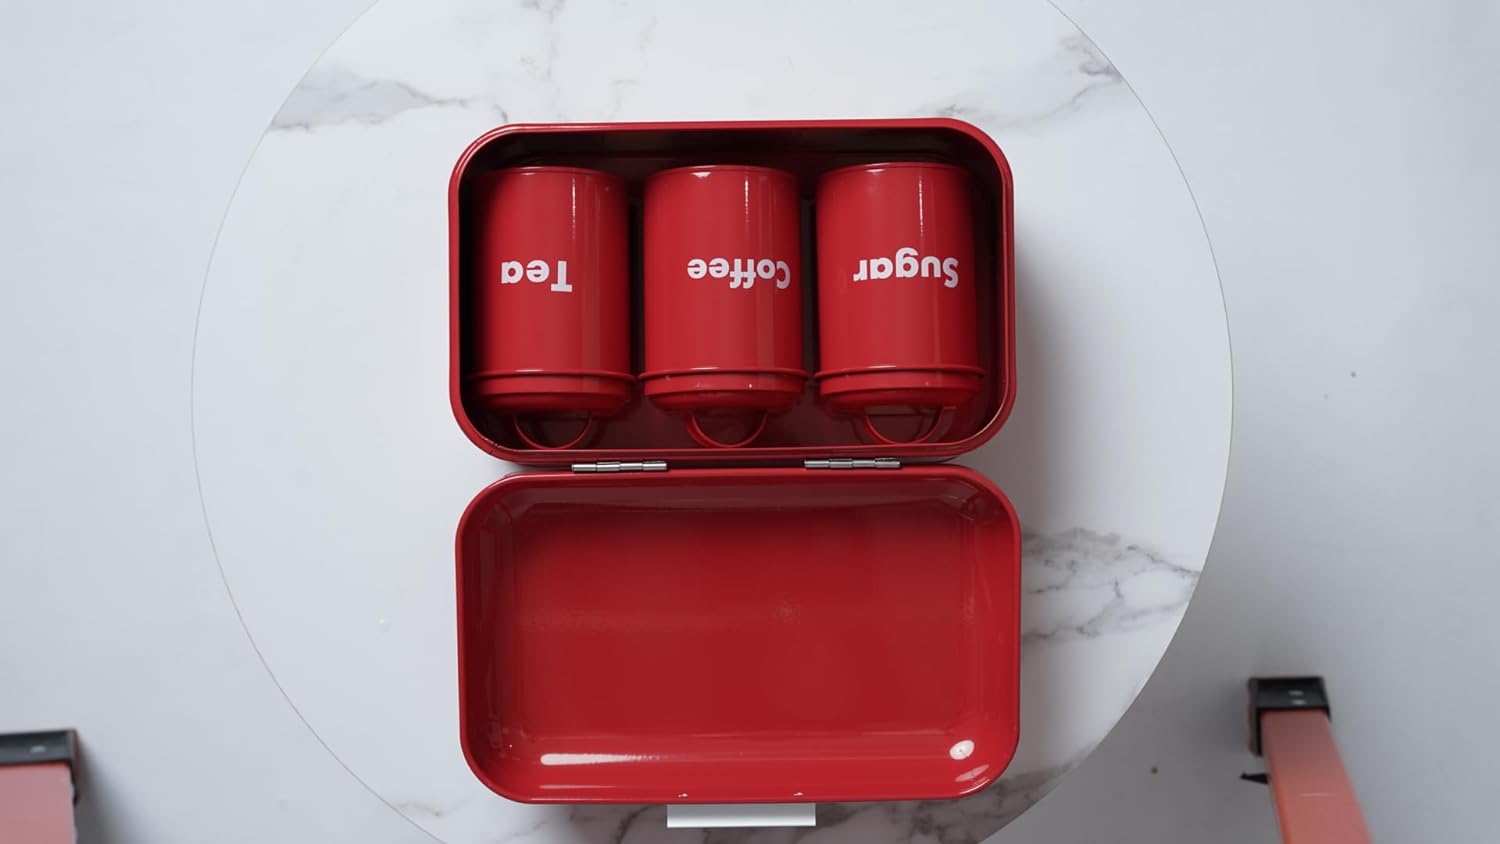 4-piece Red Metal Bread Box Set with Lids - 2